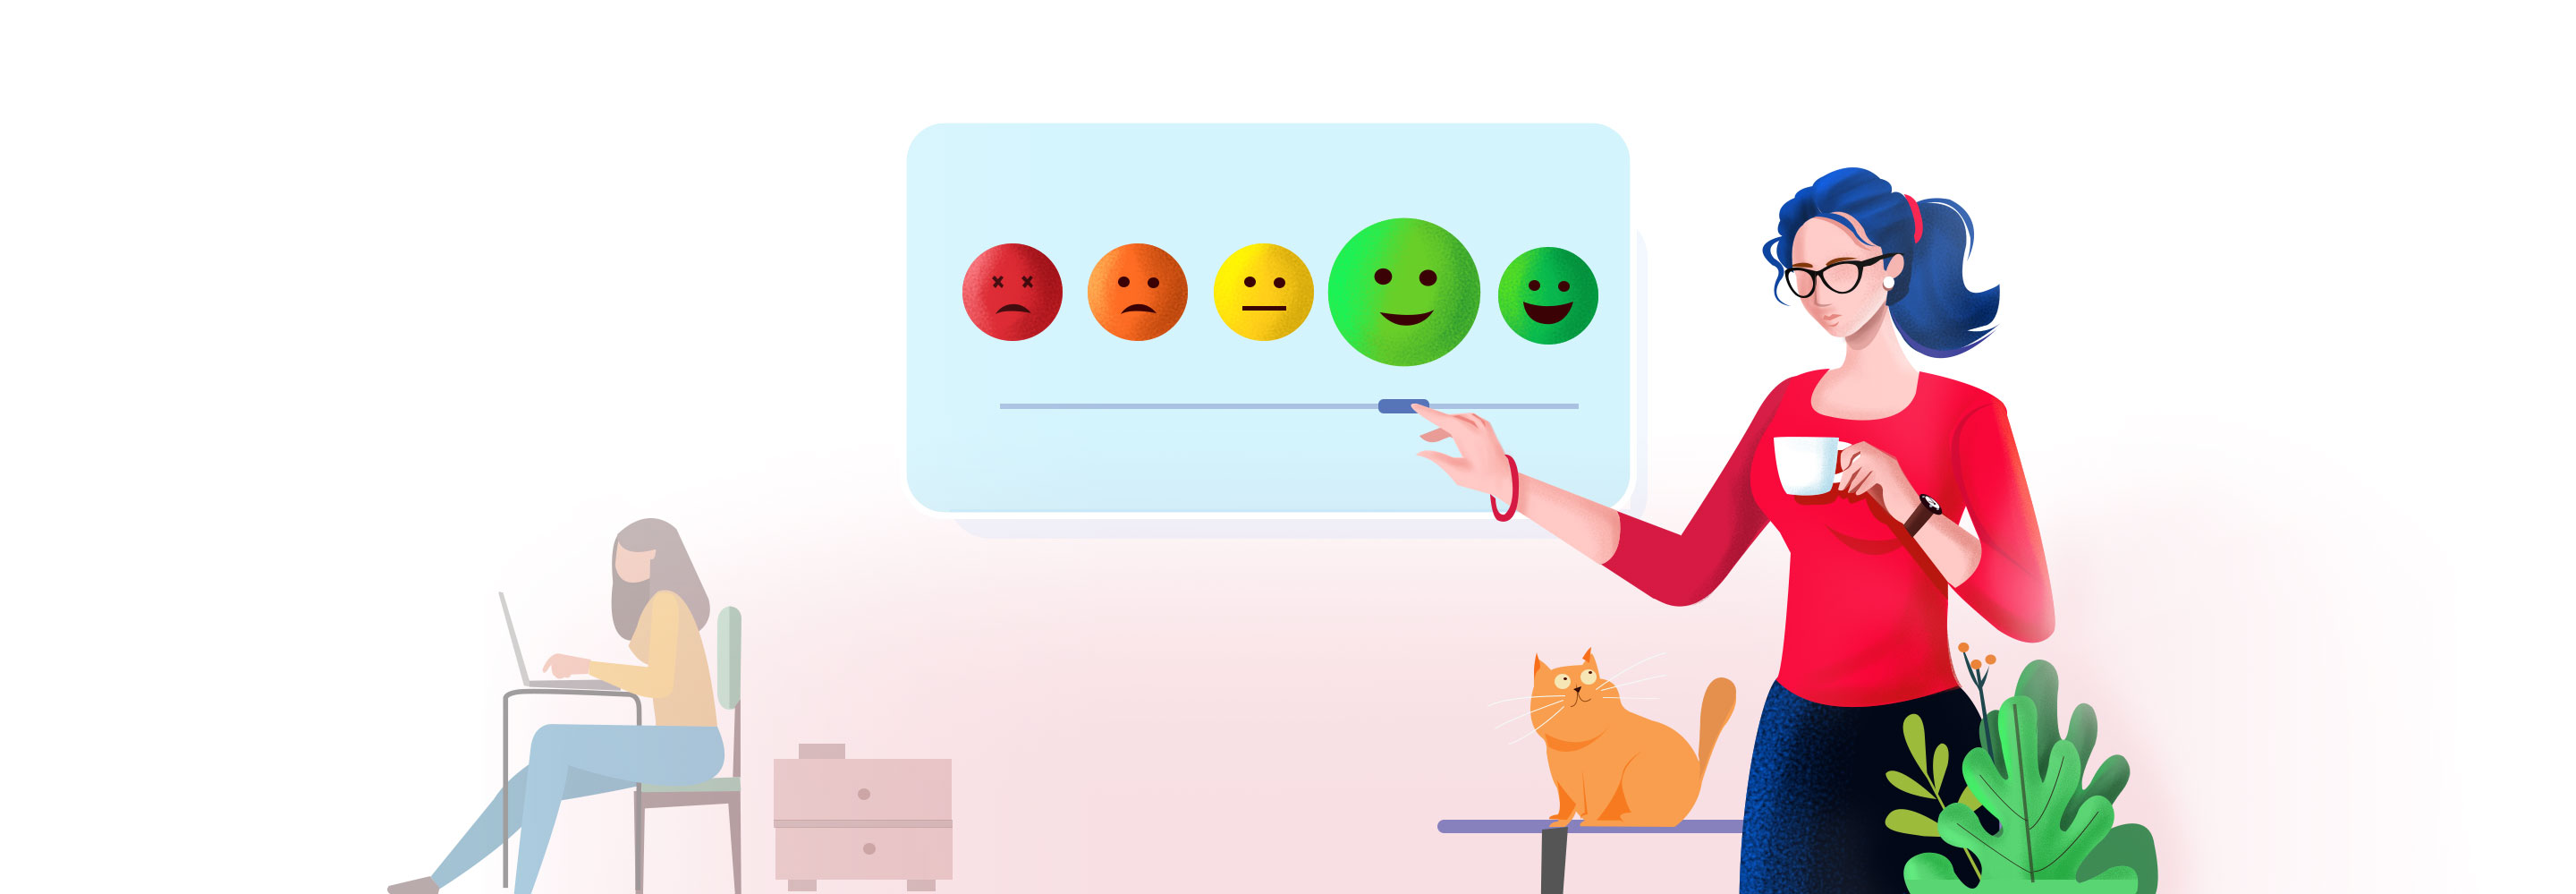 Scaling your survey responses using a Likert scale